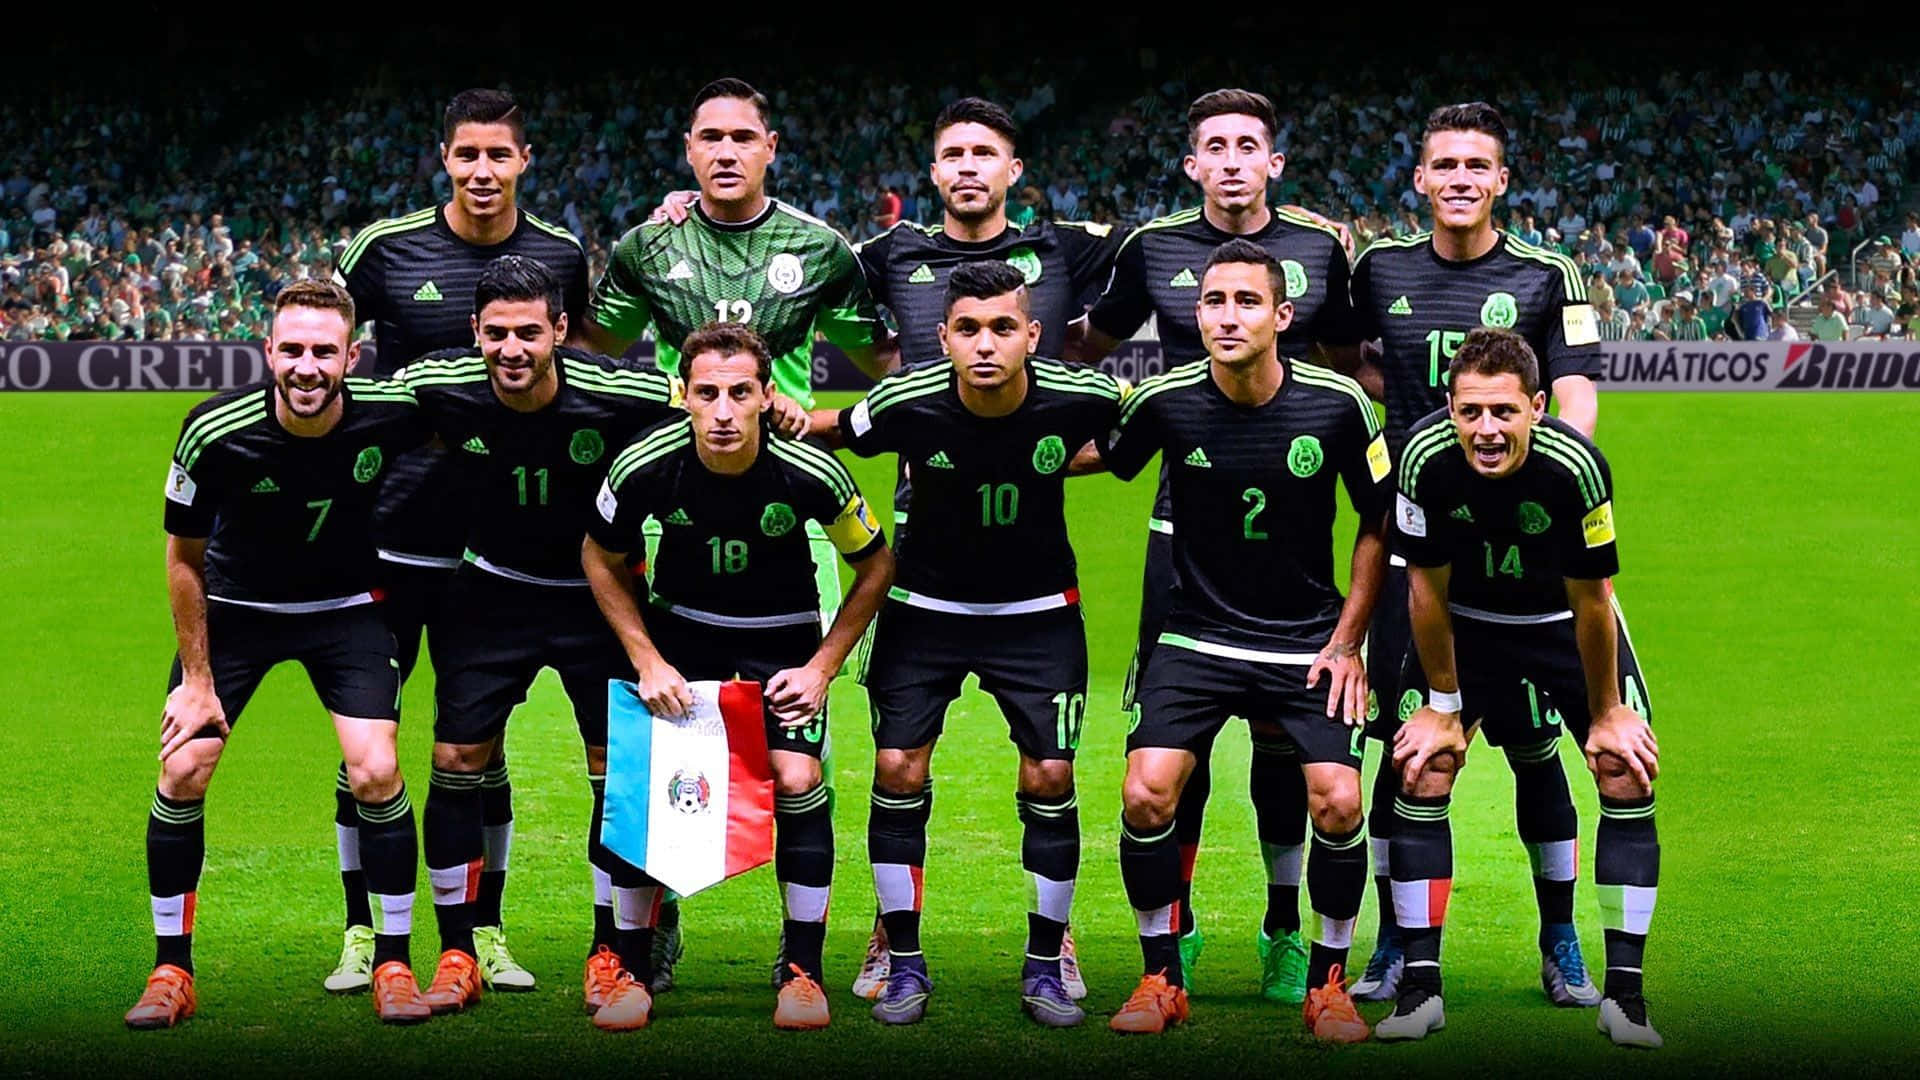 Mexican soccer team proudly showing off their national pride. Wallpaper